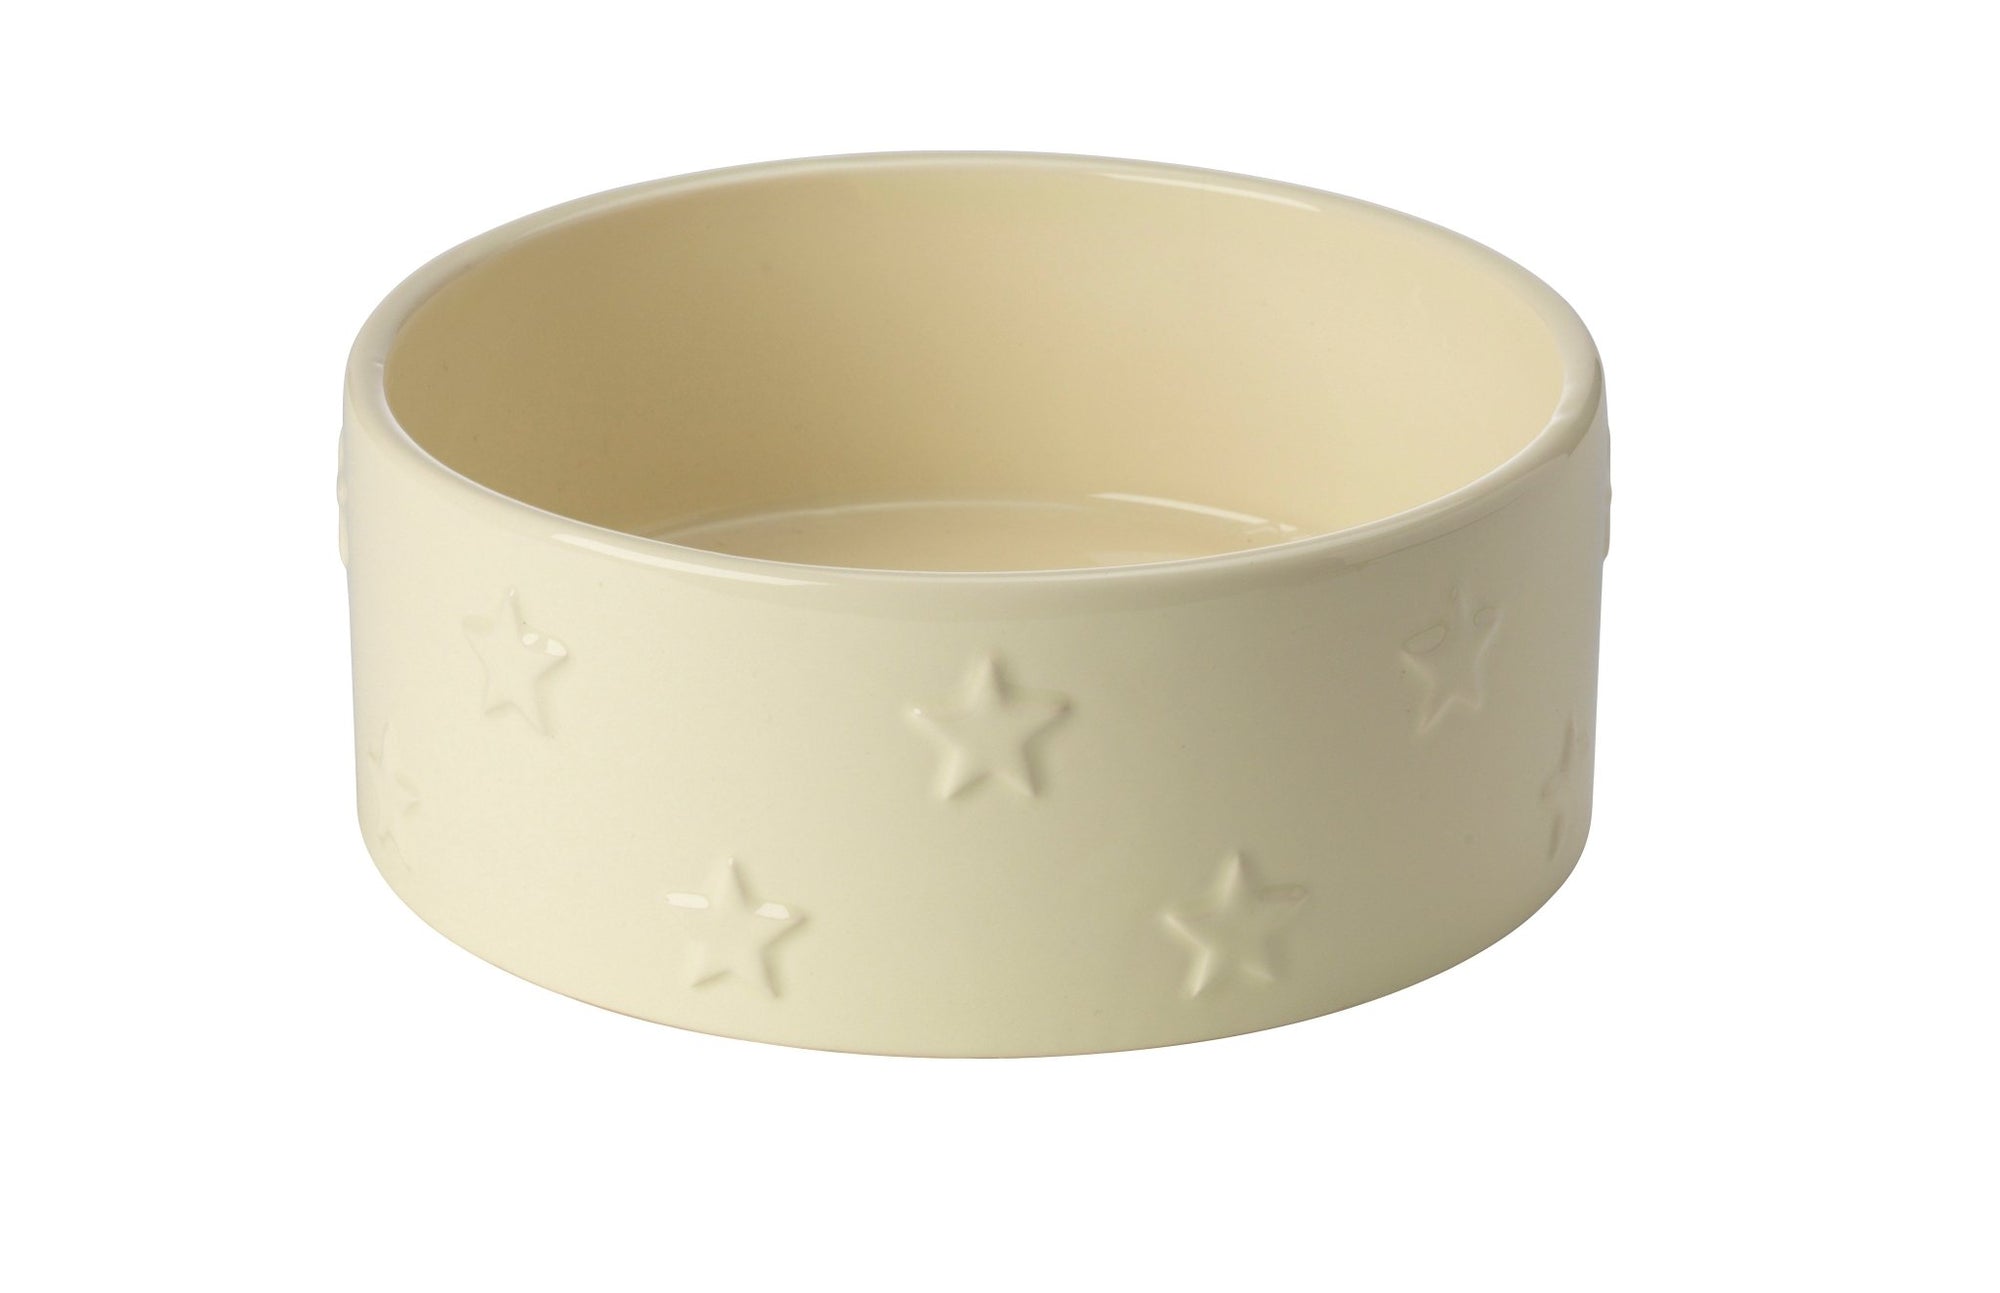 House of Paws Star Ceramic Cream Dog Bowl, House of Paws, Small